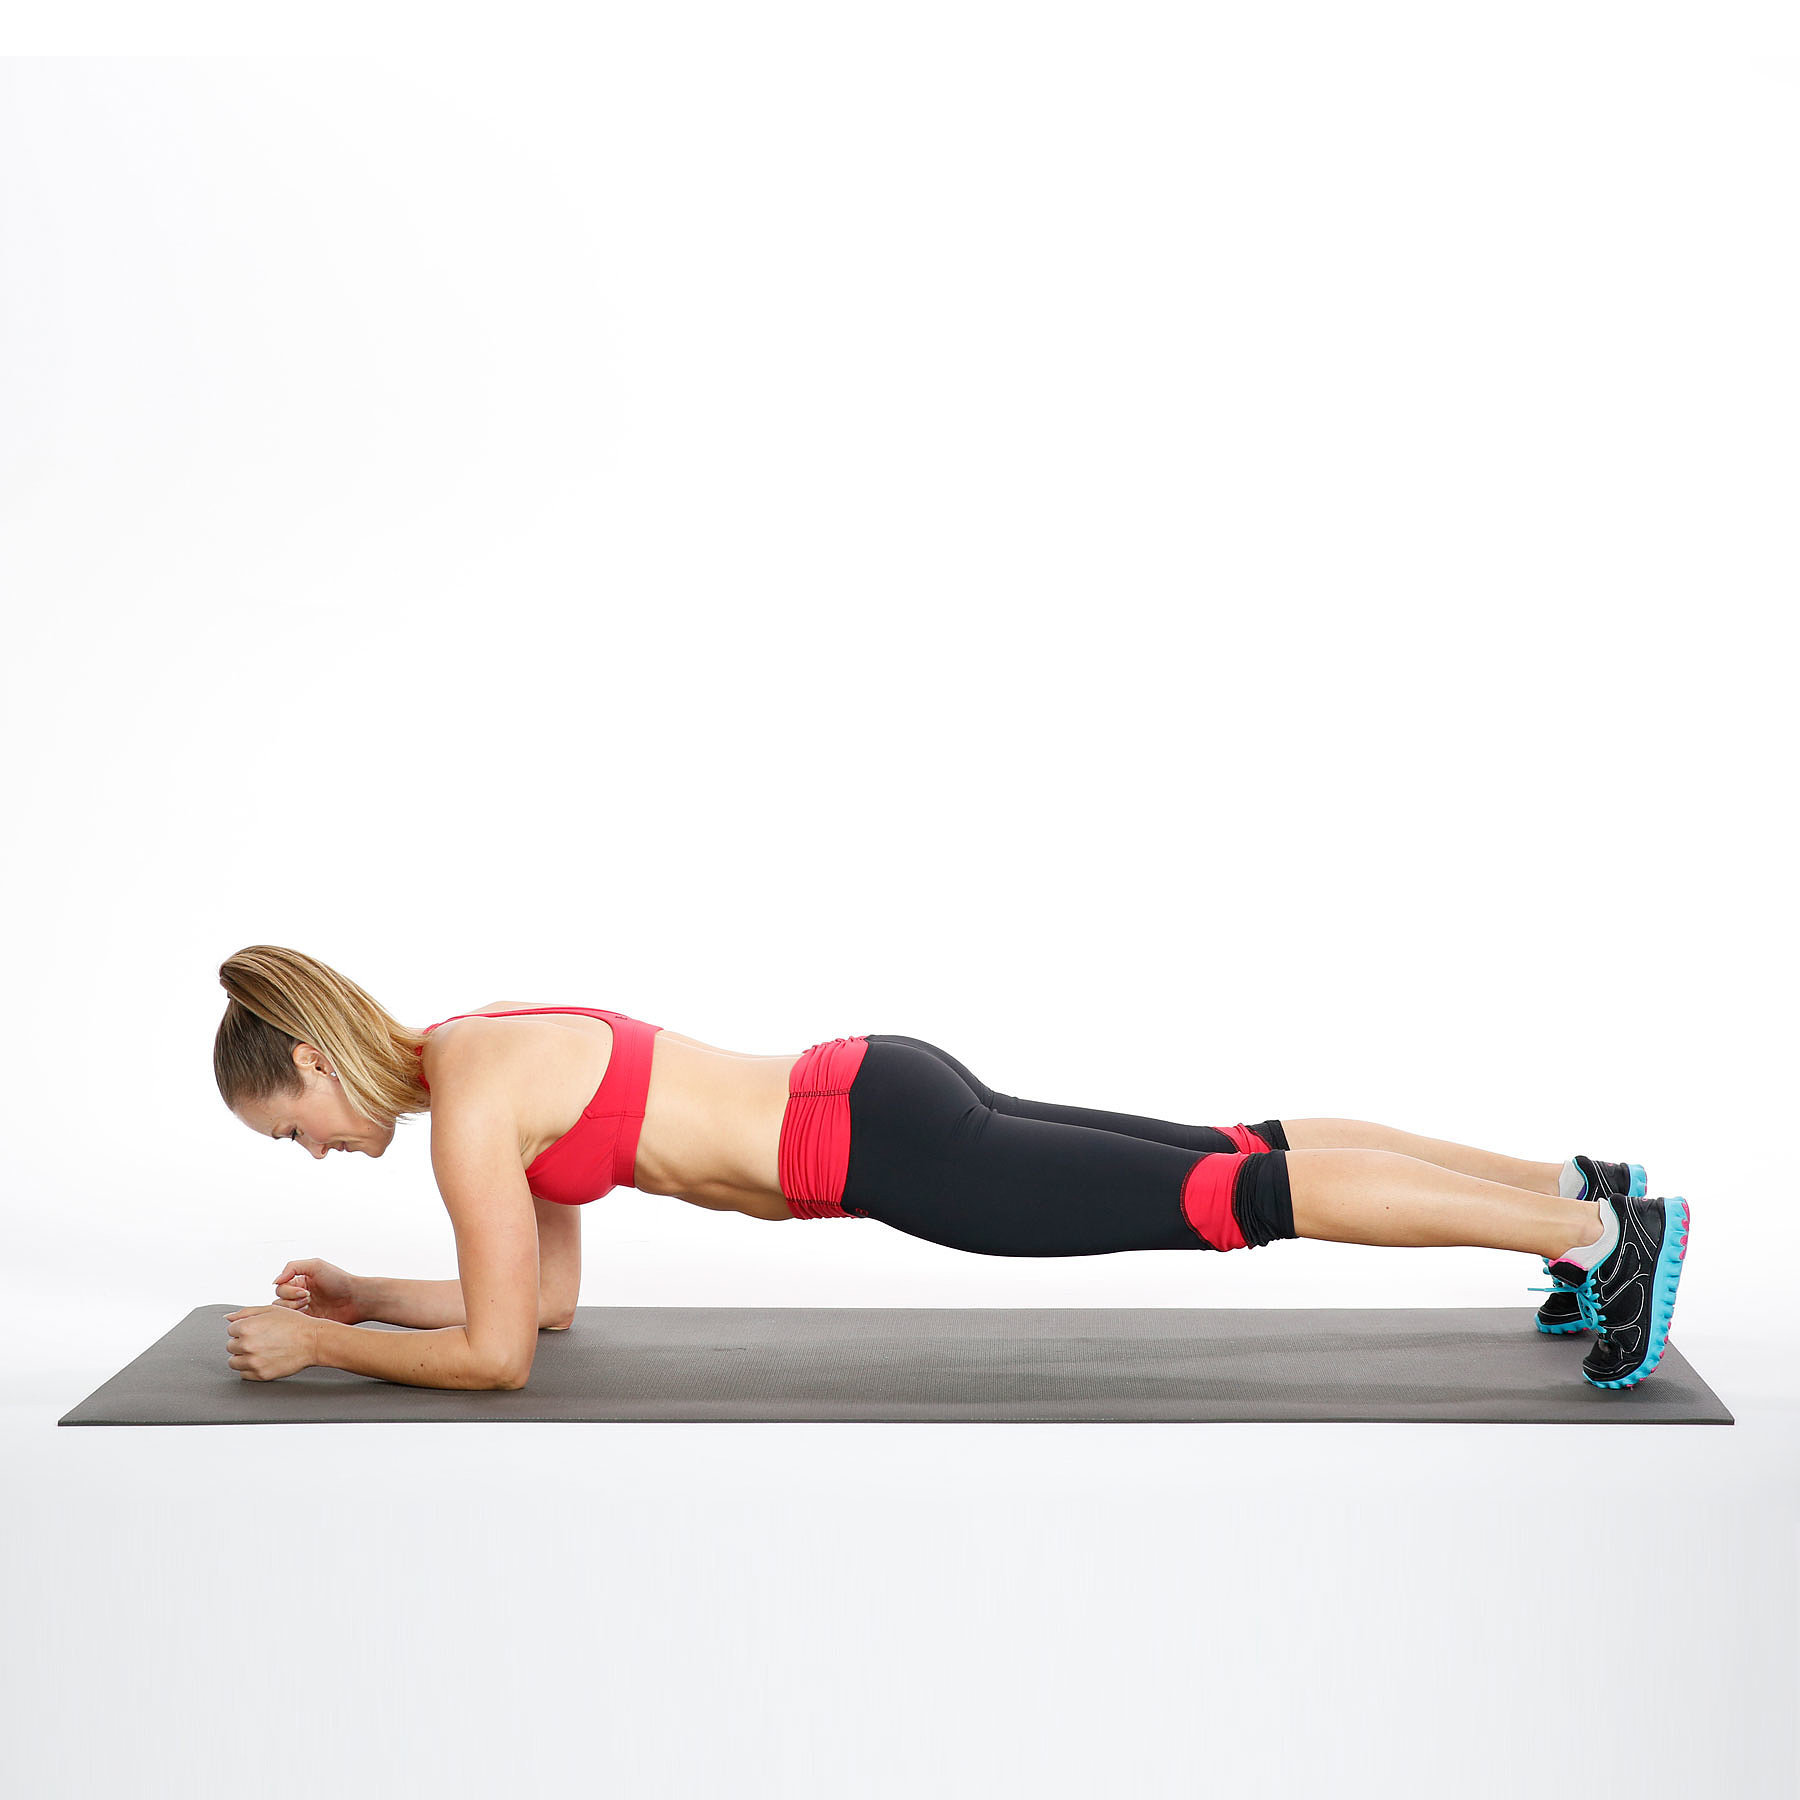 Elbow Plank With Hip Dips The Most Intense 3 Minute Ab Workout